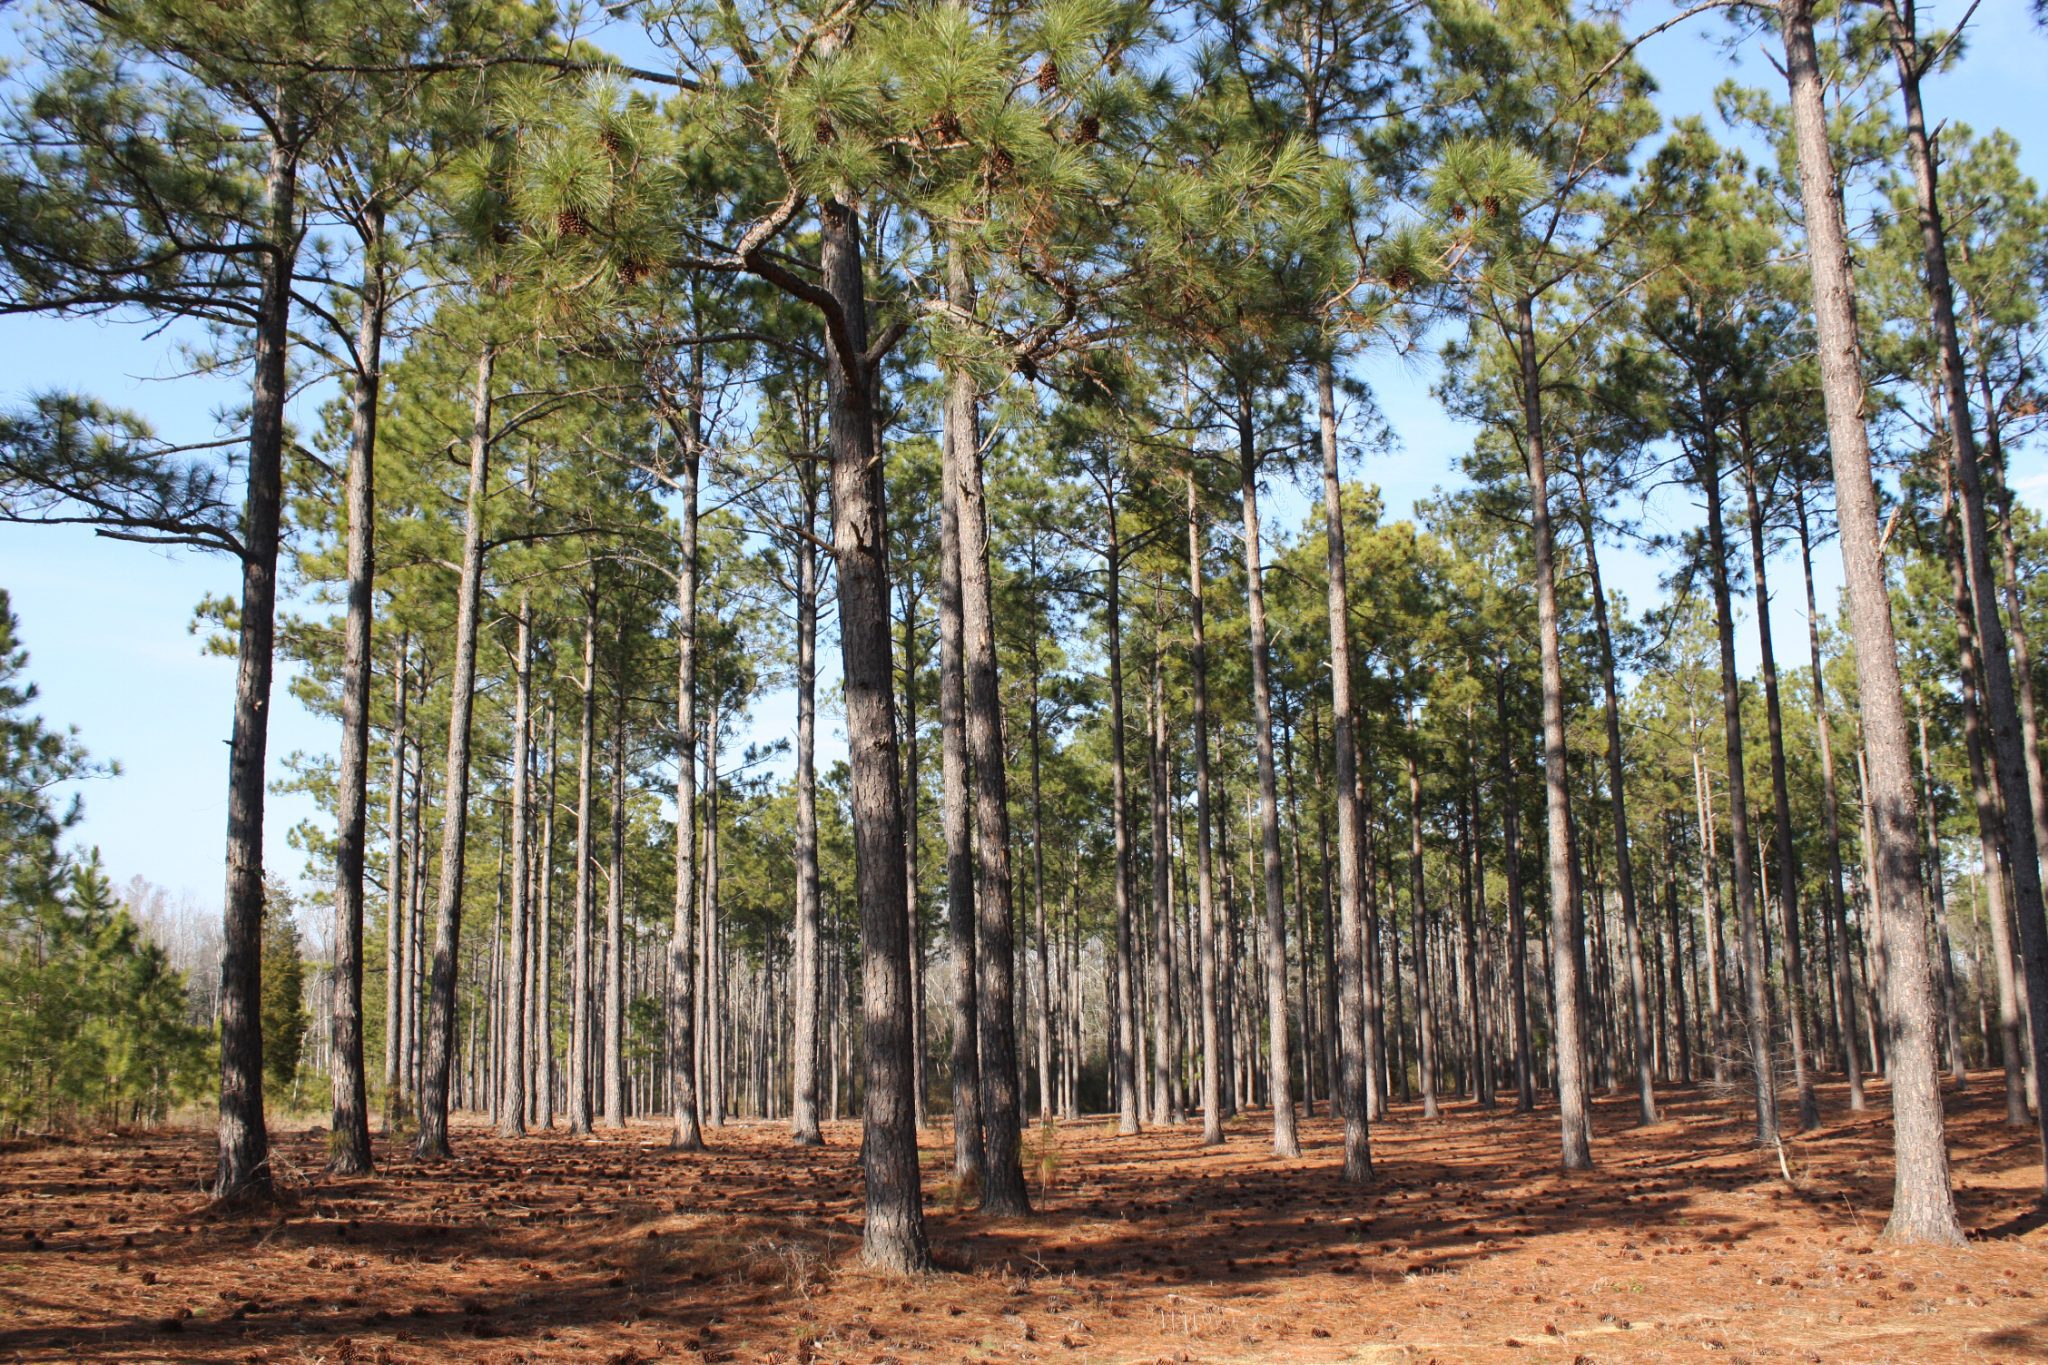 Forest owners can use the forest inventory basics guide to take stock of their pine tree stand